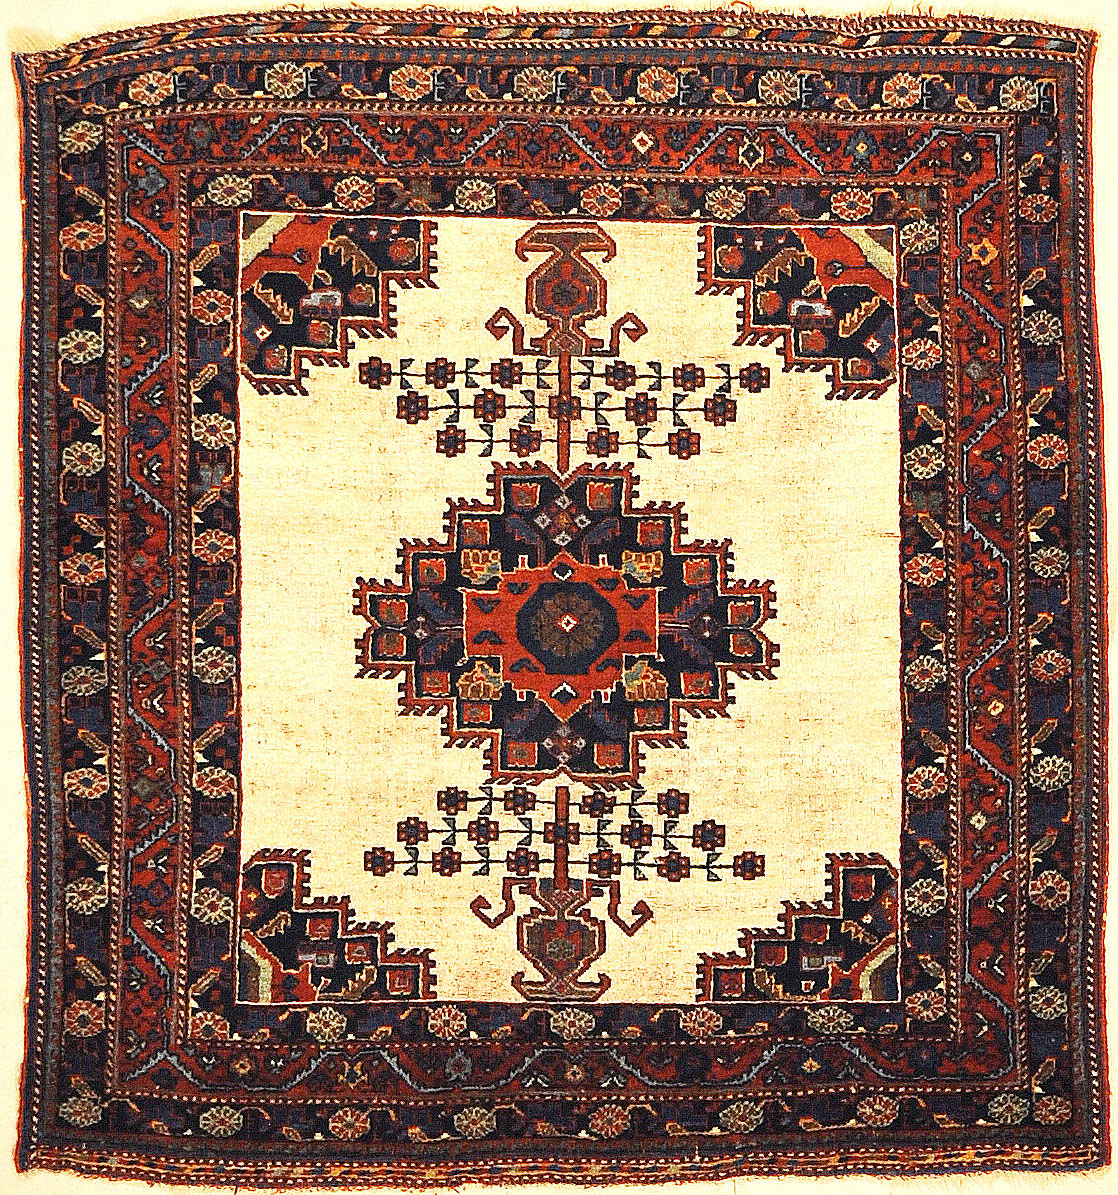 Rare Antique Persian Afshar Rug. A piece of genuine handwoven carpet art. Sold by Santa Barbara Design Center, Rugs and More.